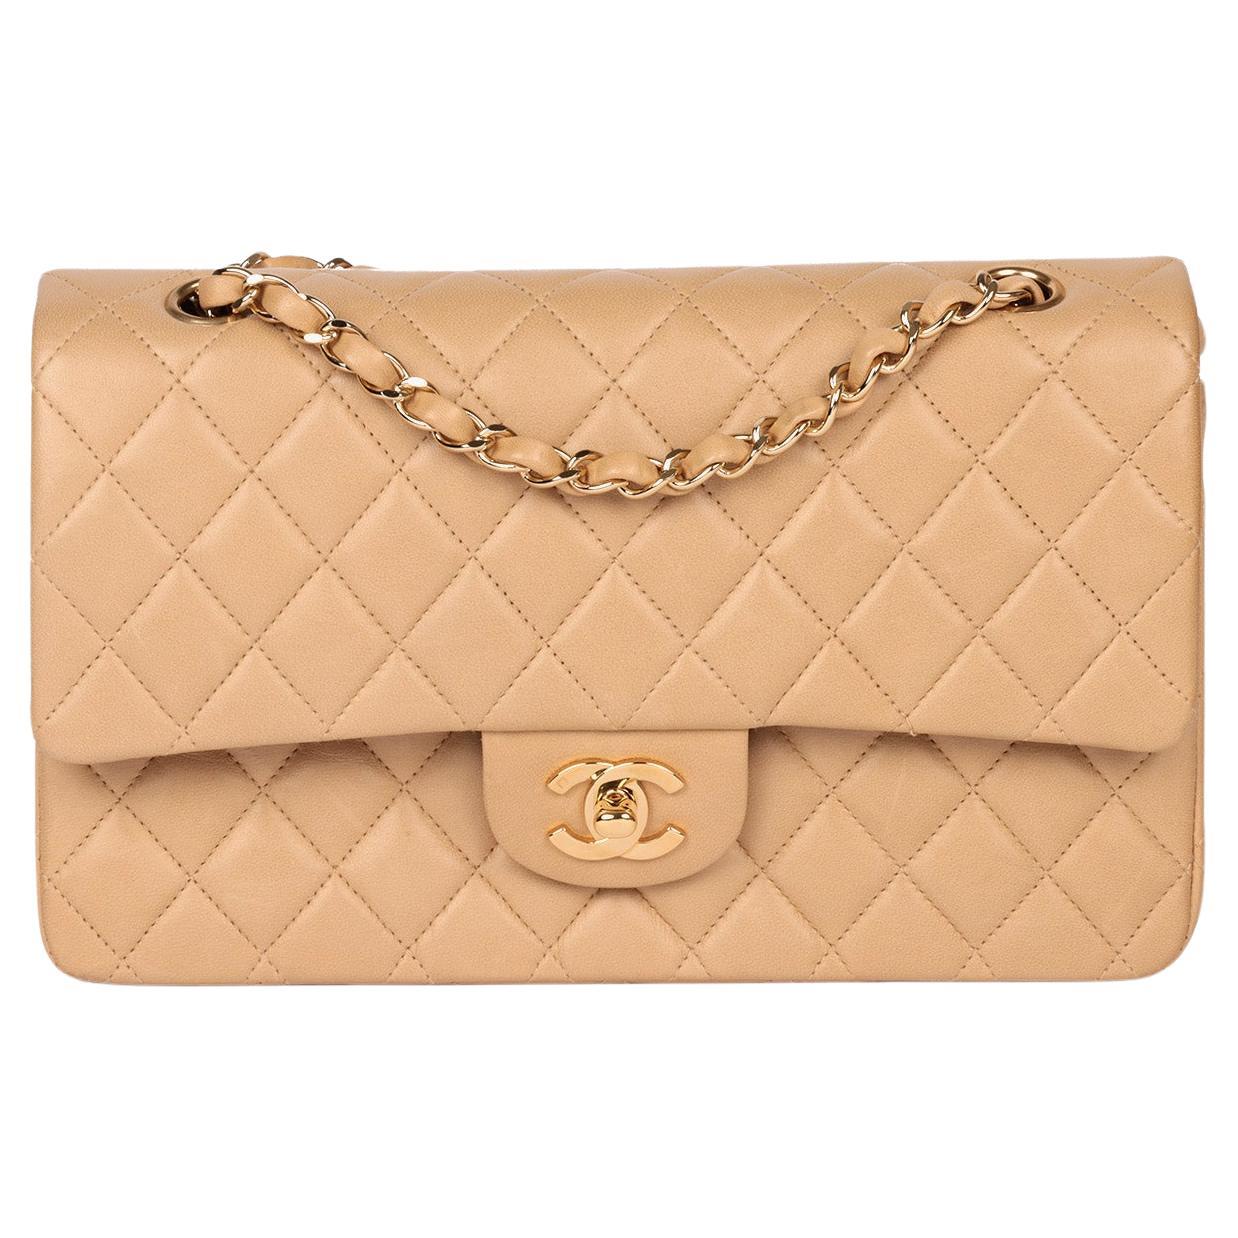 Chanel Beige Quilted Lambskin Vintage Medium Classic Double Flap Bag